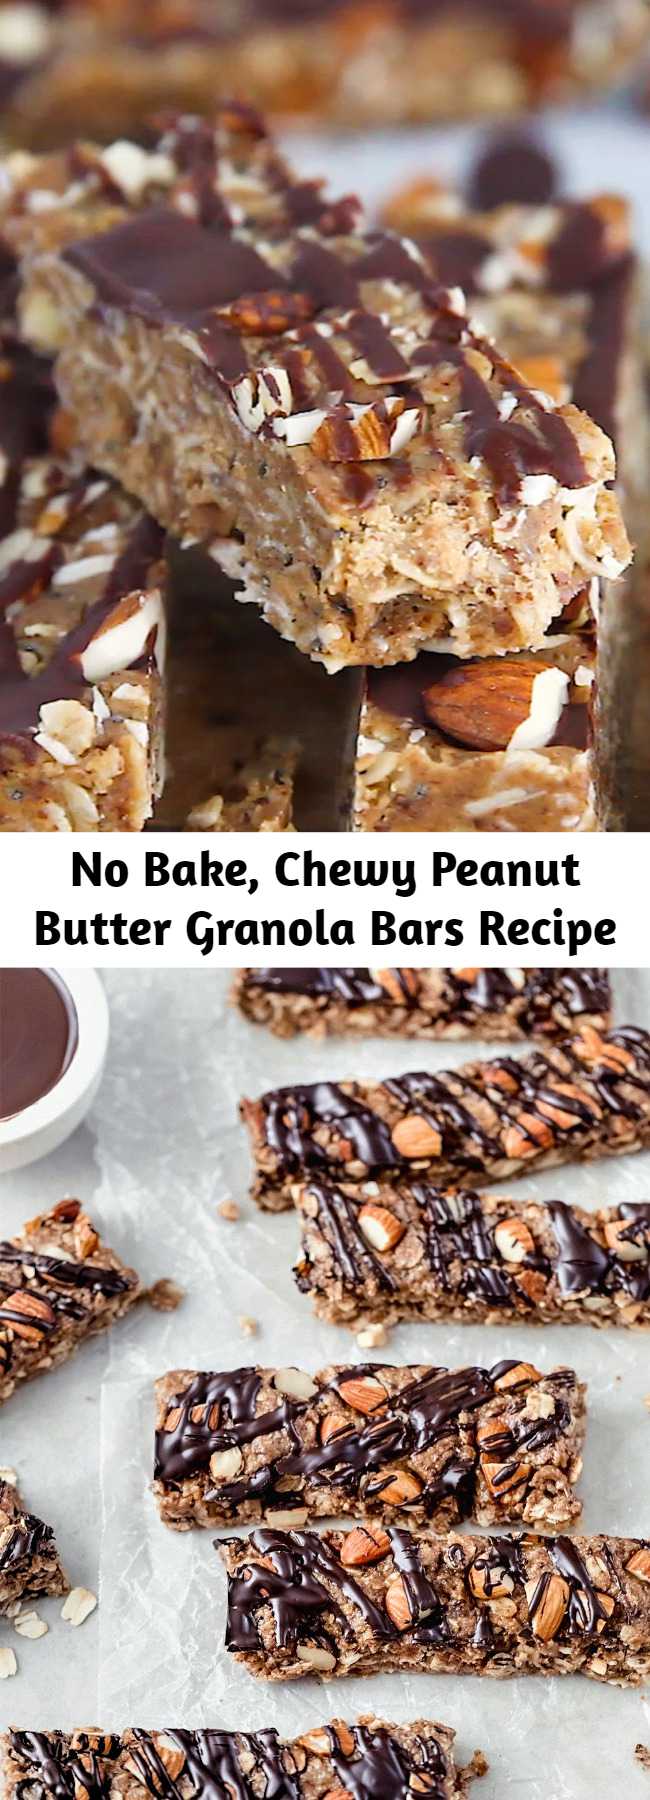 No Bake, Chewy Peanut Butter Granola Bars Recipe - No bake peanut butter granola bars packed with wholesome ingredients like chia seeds, flax, almonds, and dark chocolate. These chewy granola bars will be your new favorite grab-and-go snack! #granolabars #nobake #snackrecipe #snackideas #healthysnack #peanutbutter